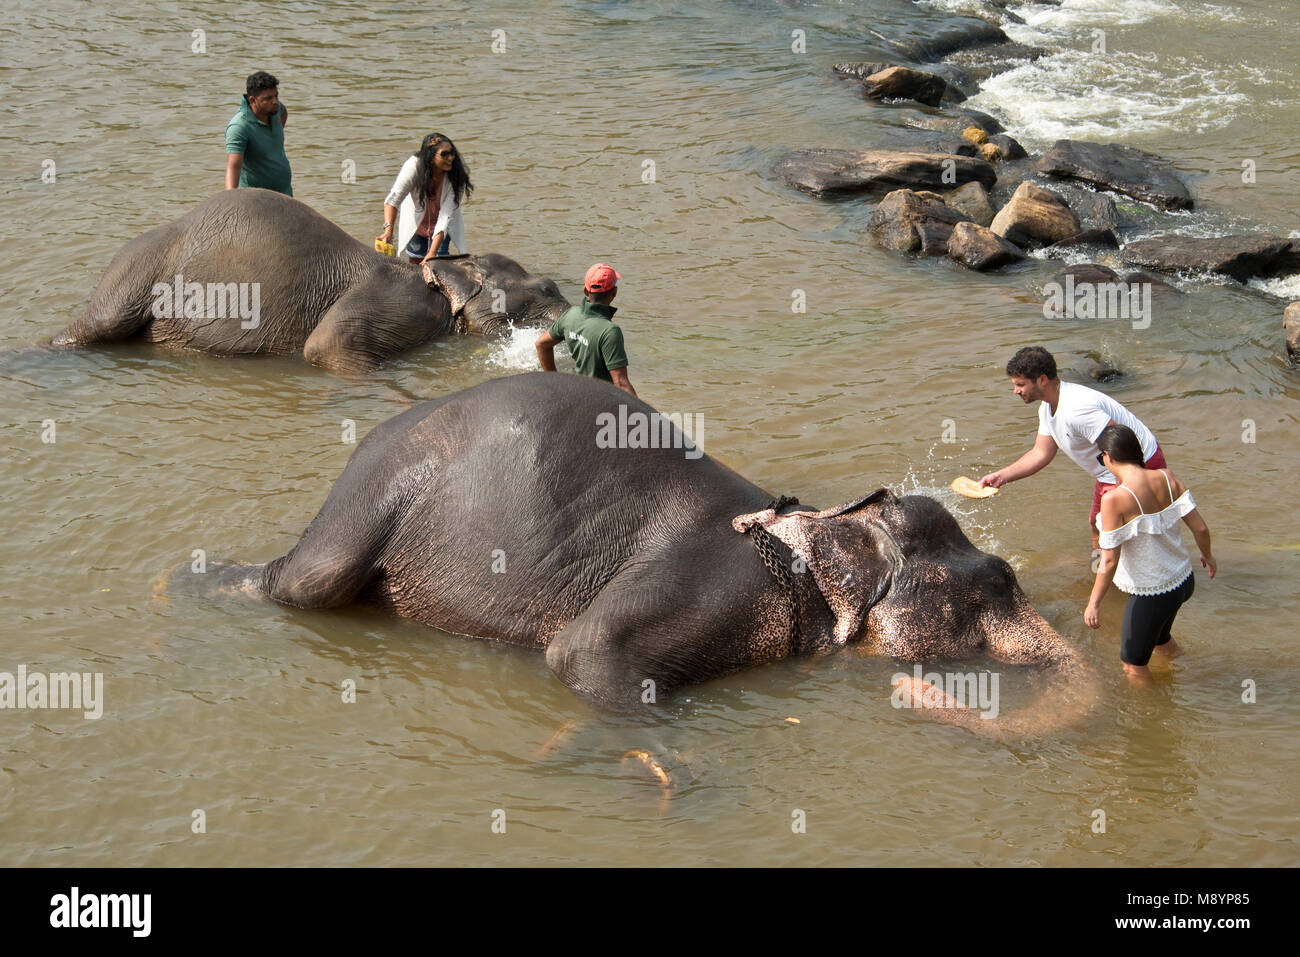 Sri Lankan elephants from the Pinnawala Elephant Orphanage bathing in the river with tourists paying to wash them.. Stock Photo